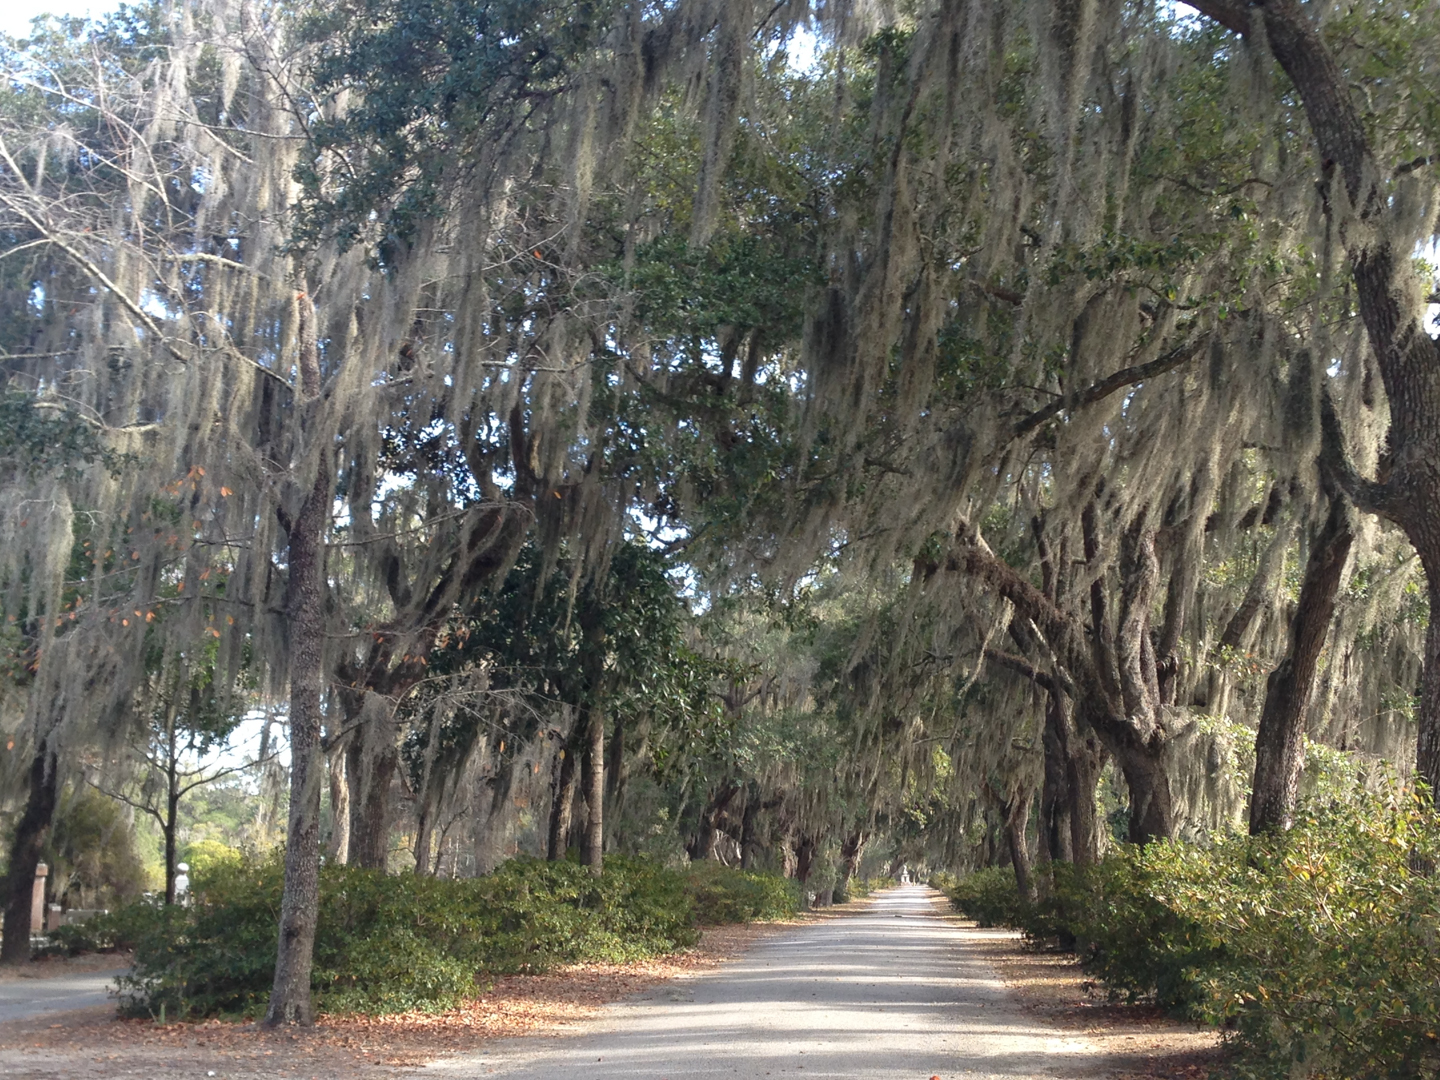 Spanish Moss on the trees